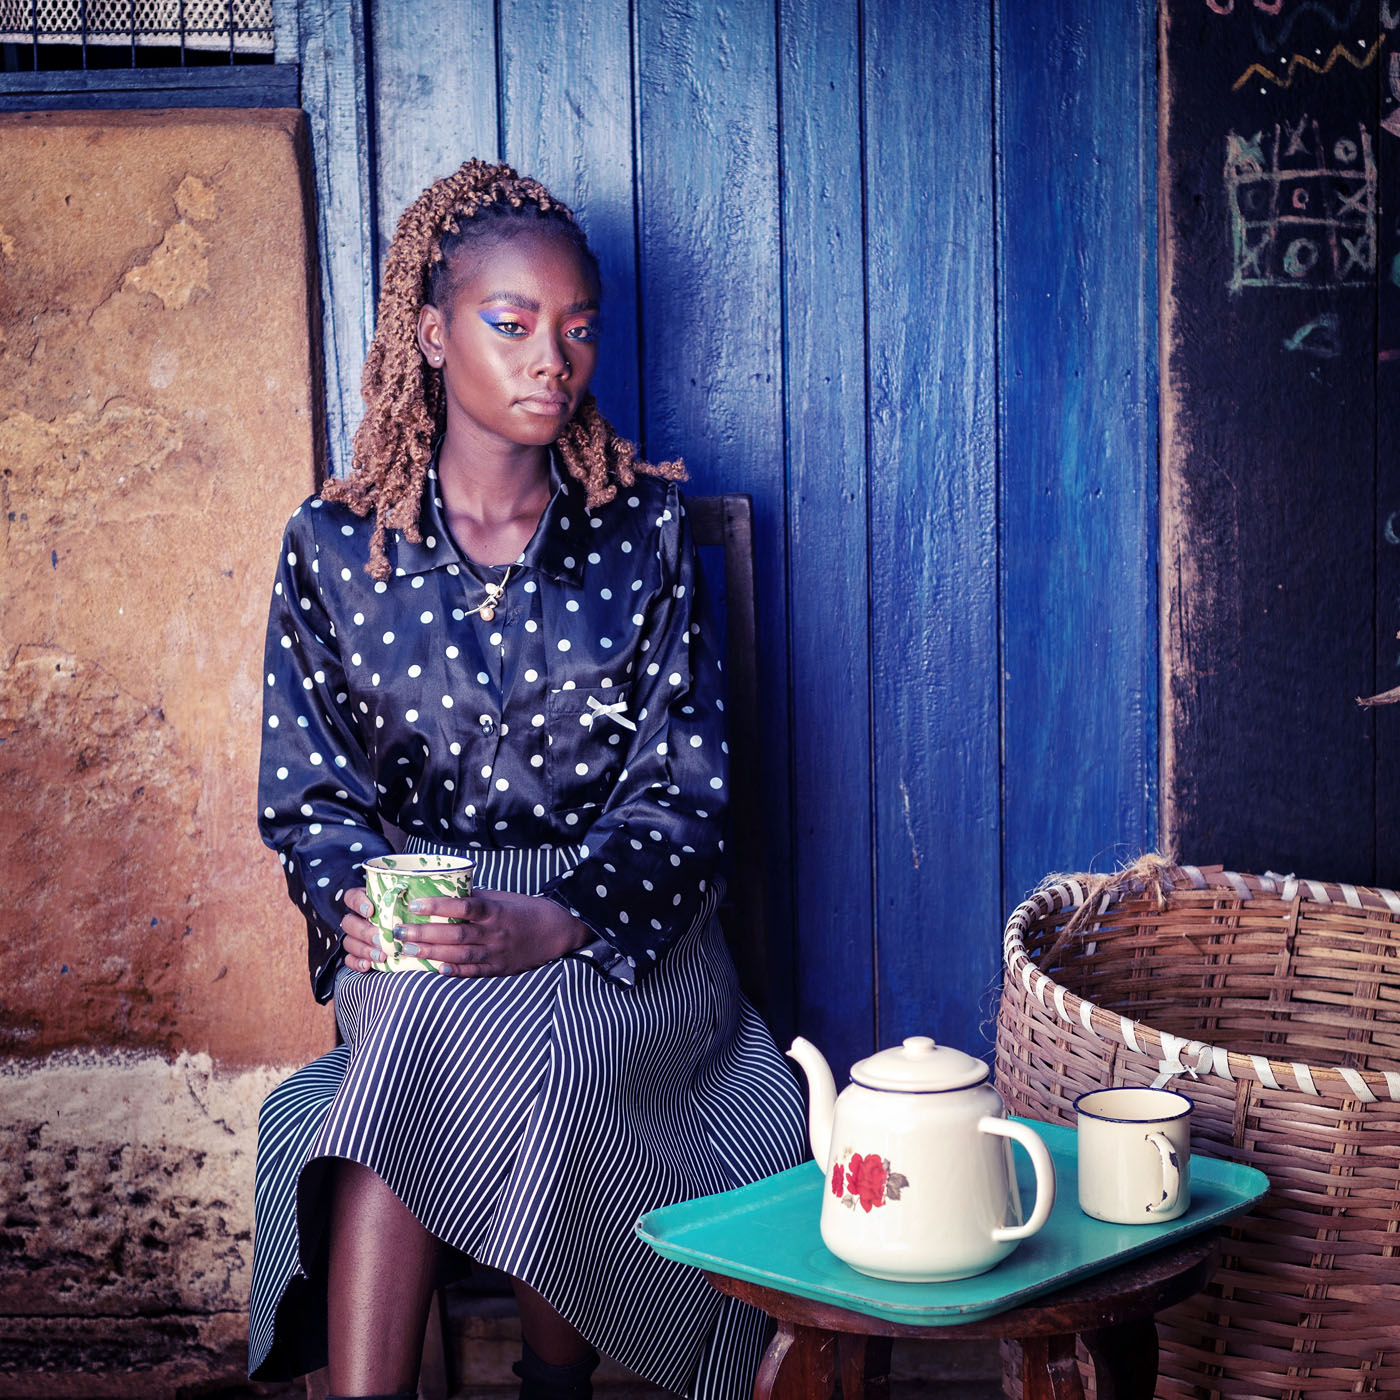 Portrait of young African woman holding a metal mug of tea